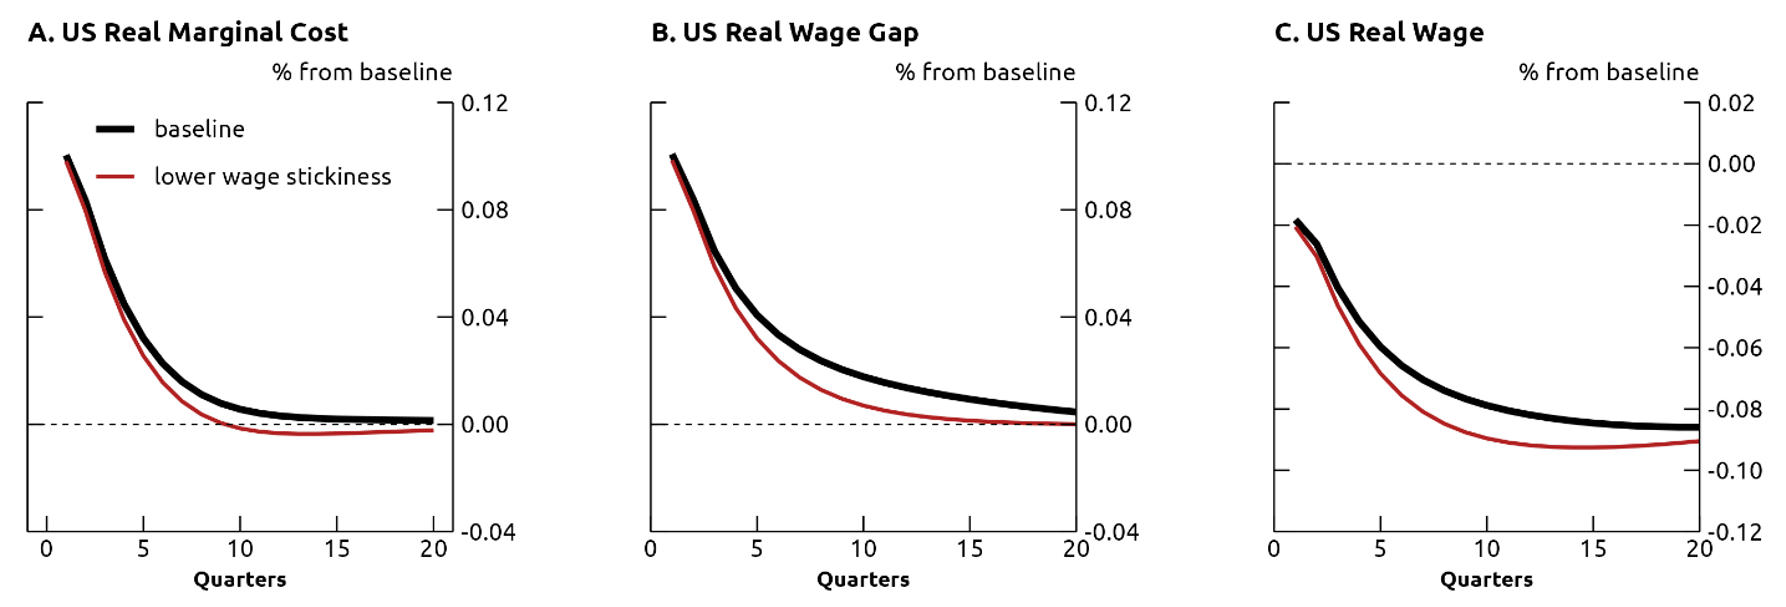 Figure 2. Effects of Foreign Oil Supply Shock on U.S. Labor Costs. See accessible link for data.